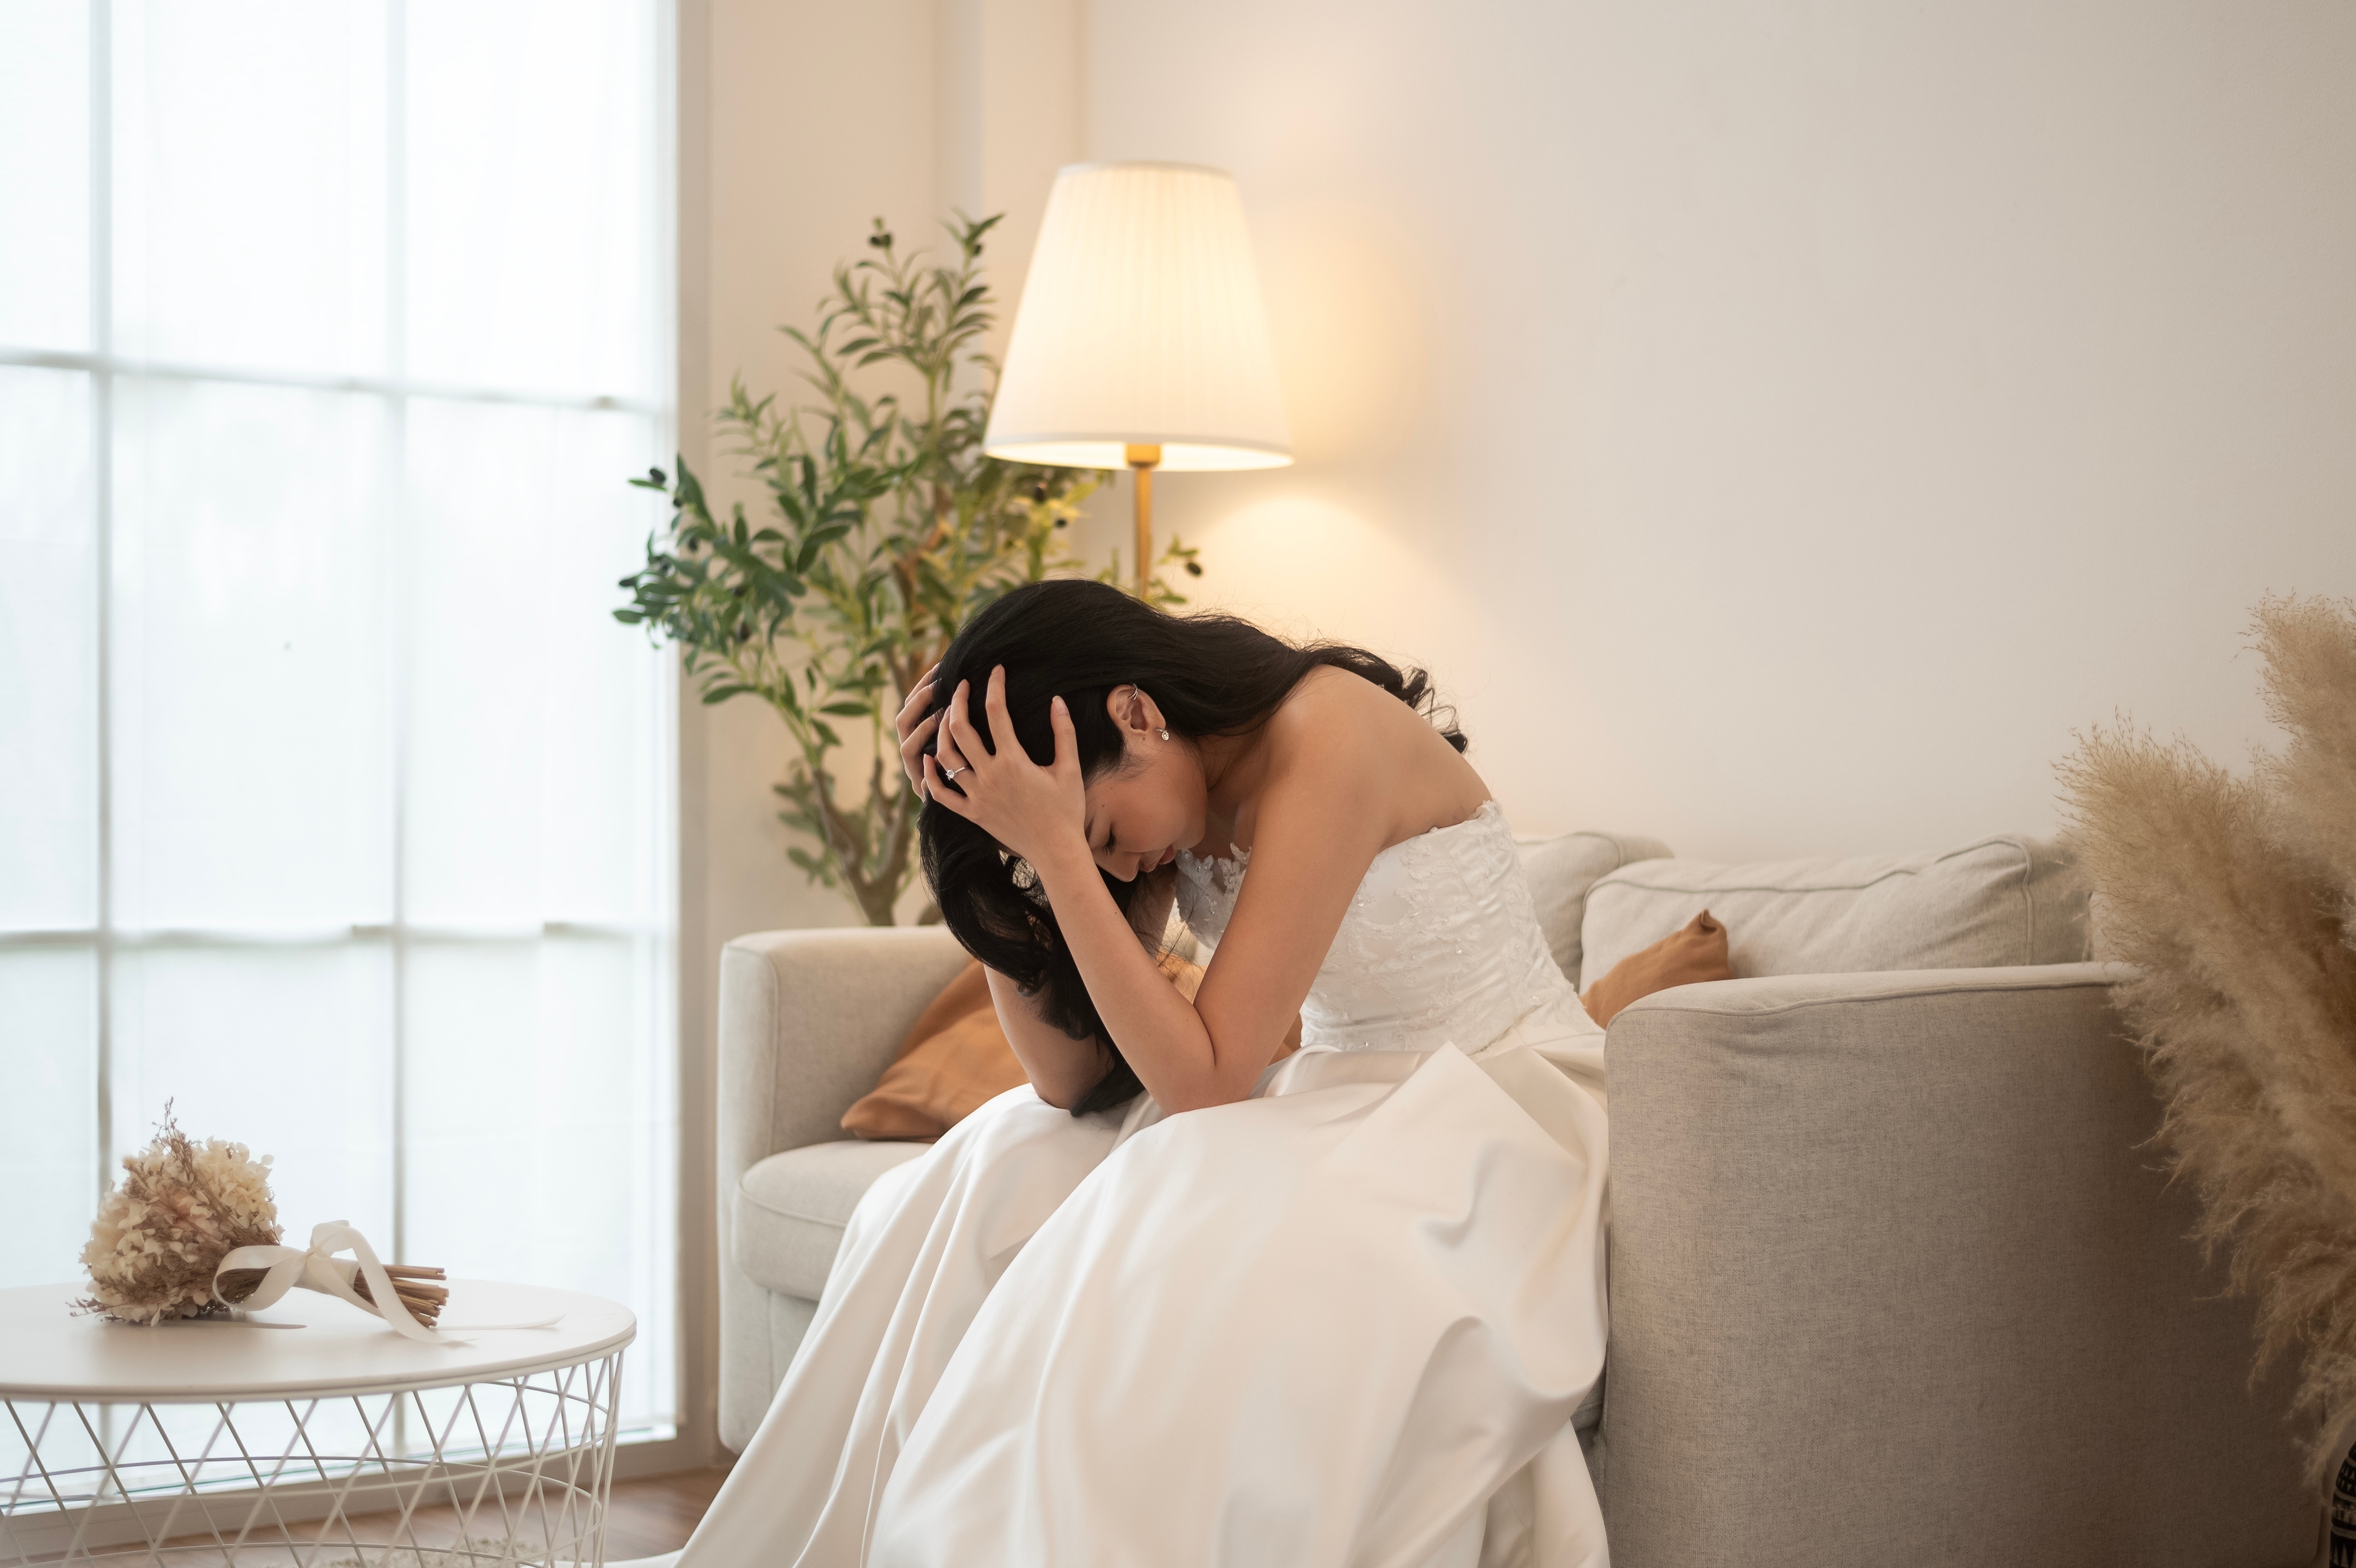 An upset bride sitting on a couch | Source: Shutterstock